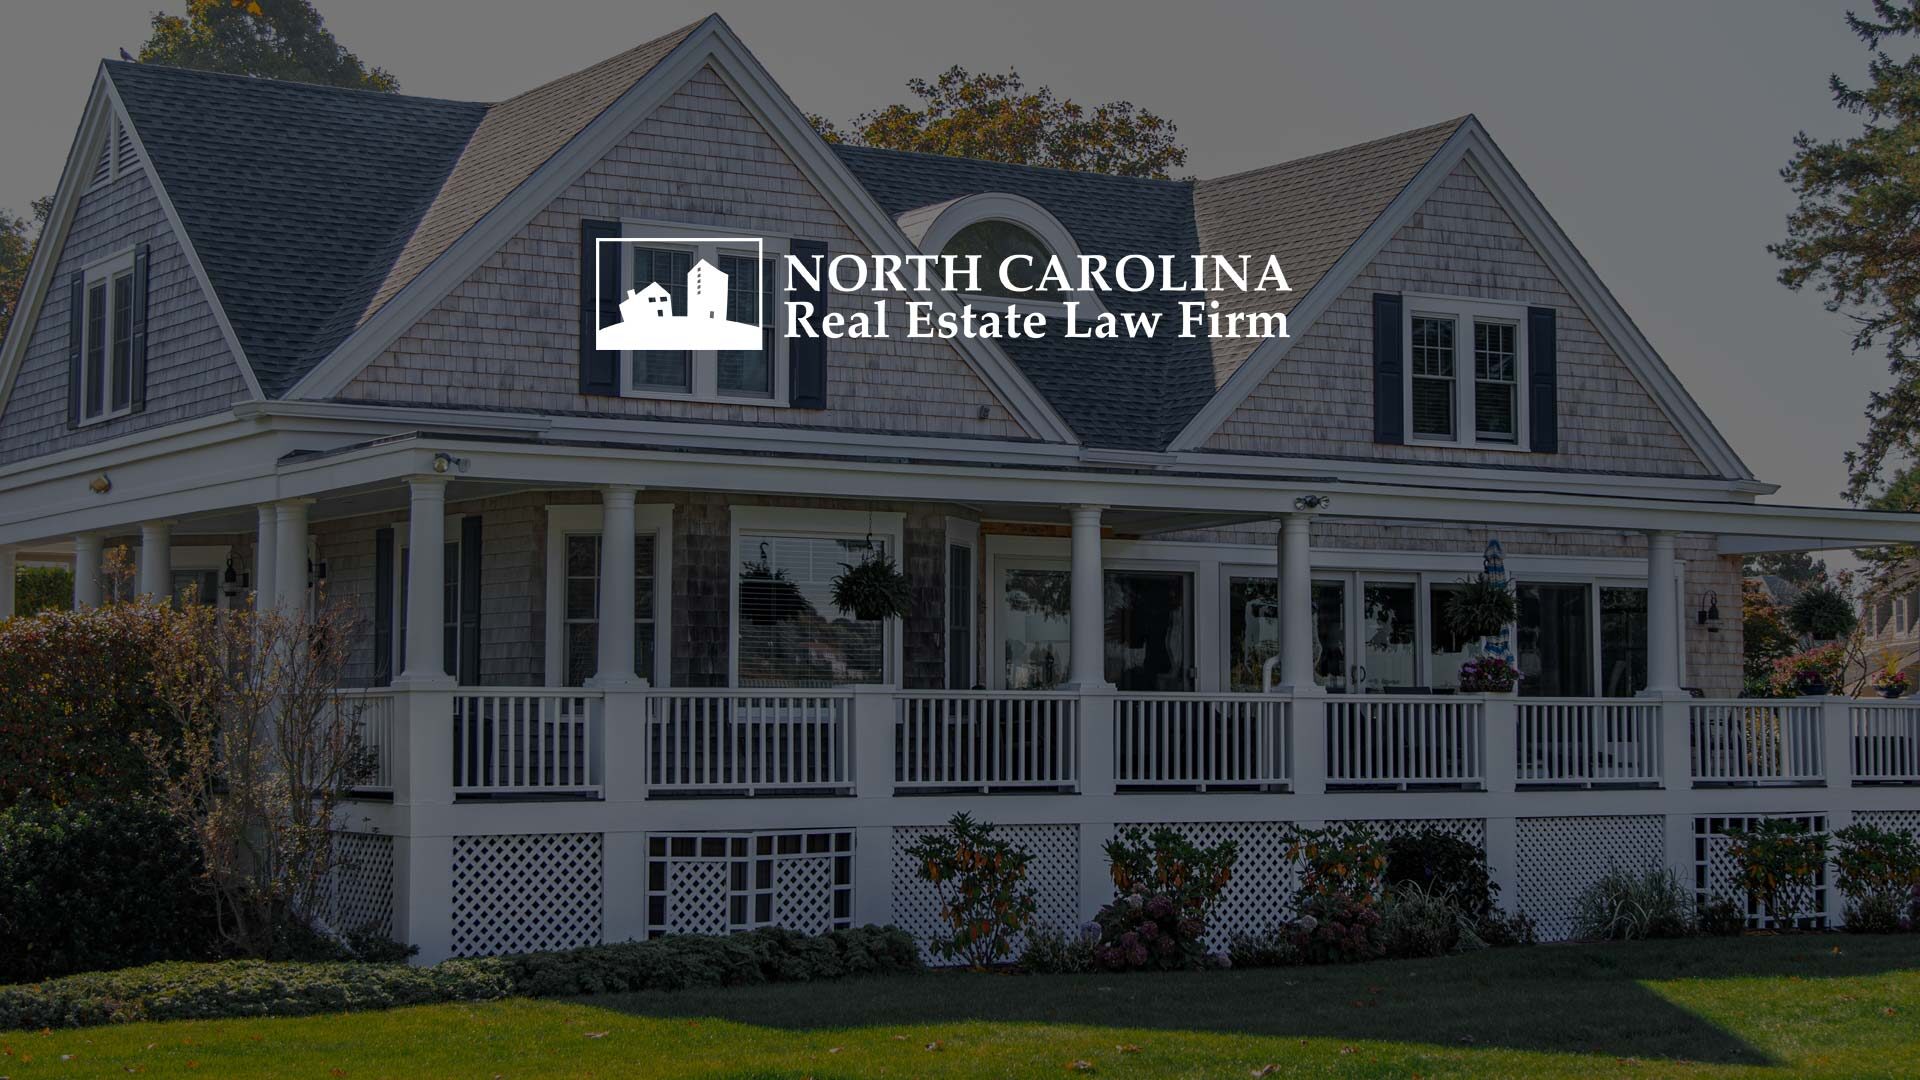 North Carolina Real Estate Law Firm House Photo